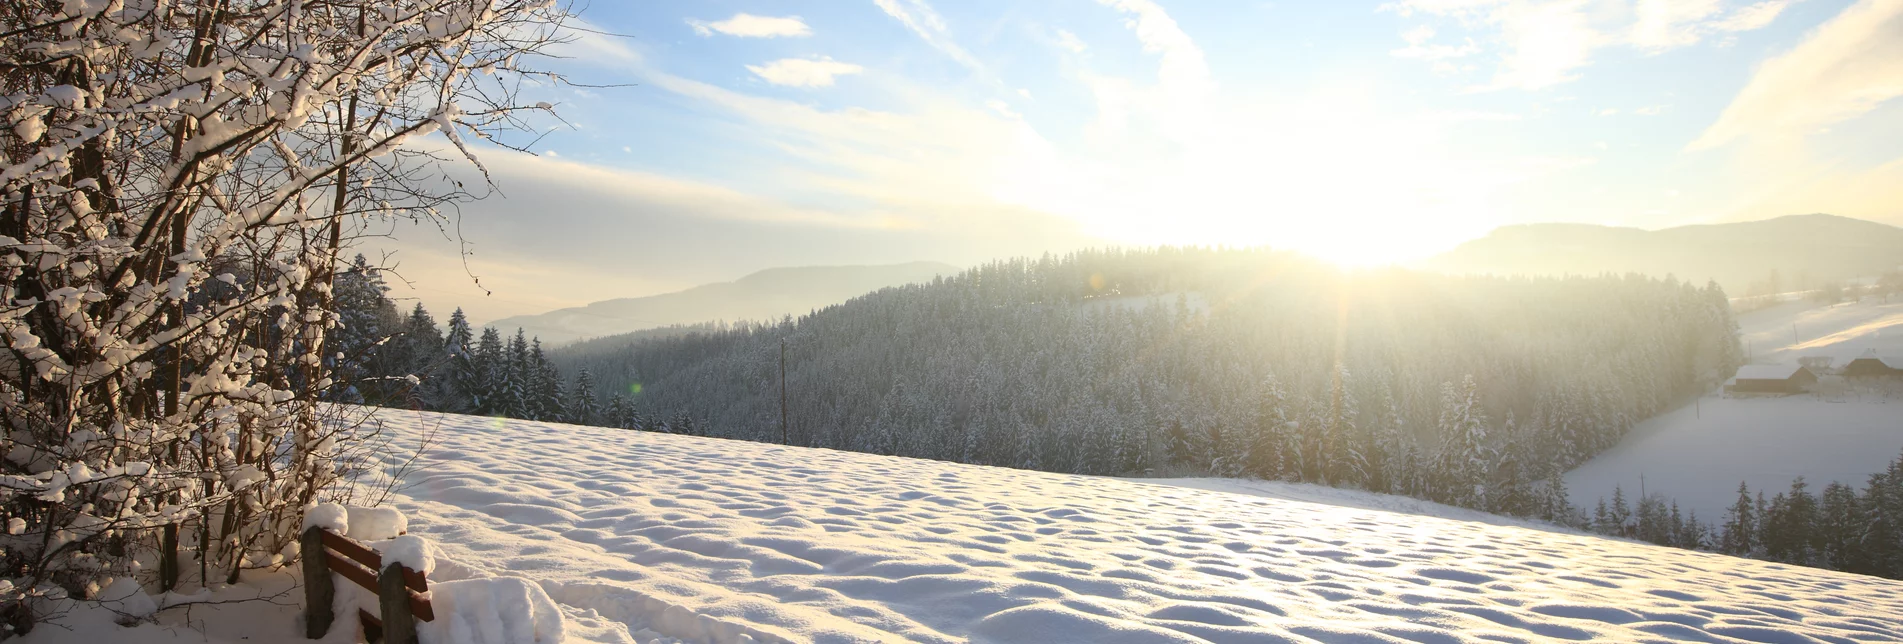 Snowy resting place with a view in the Joglland-Waldheimat in Eastern Styria | © TV Oststeiermark | Harry Schiffer